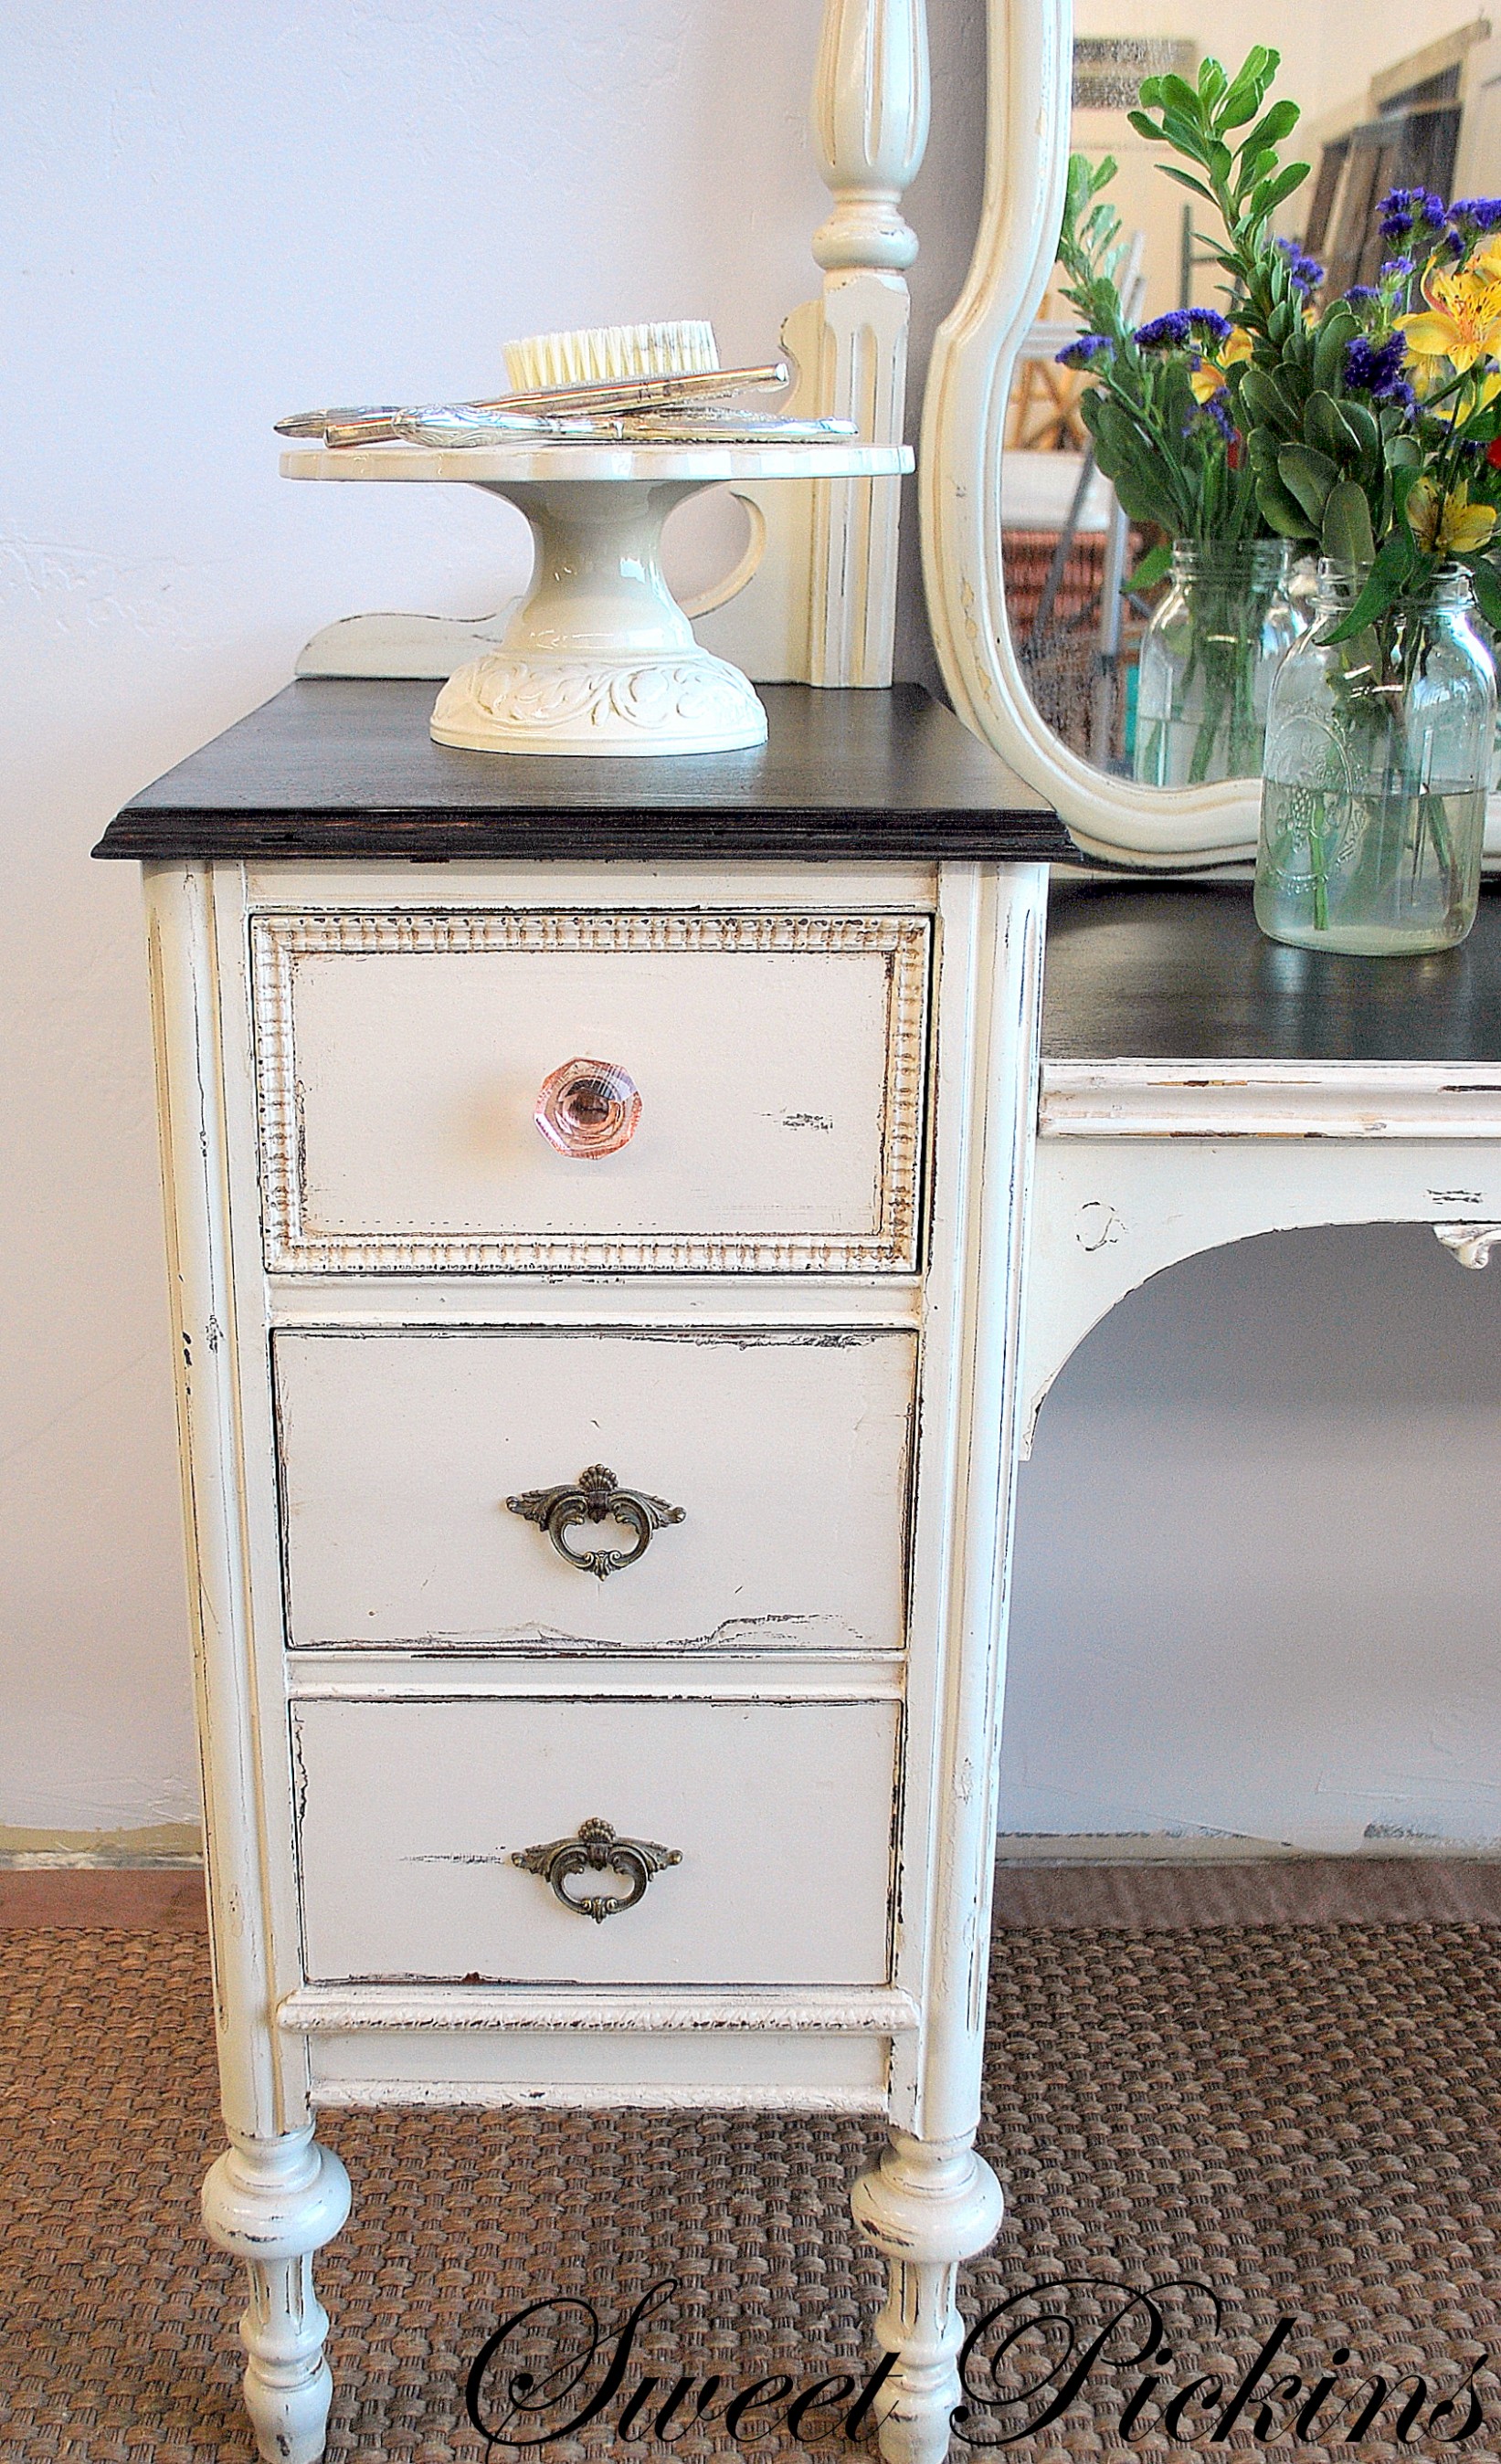 Before & After – Refinished Antique Vanity | Sweet ... Hobby Lobby Furniture